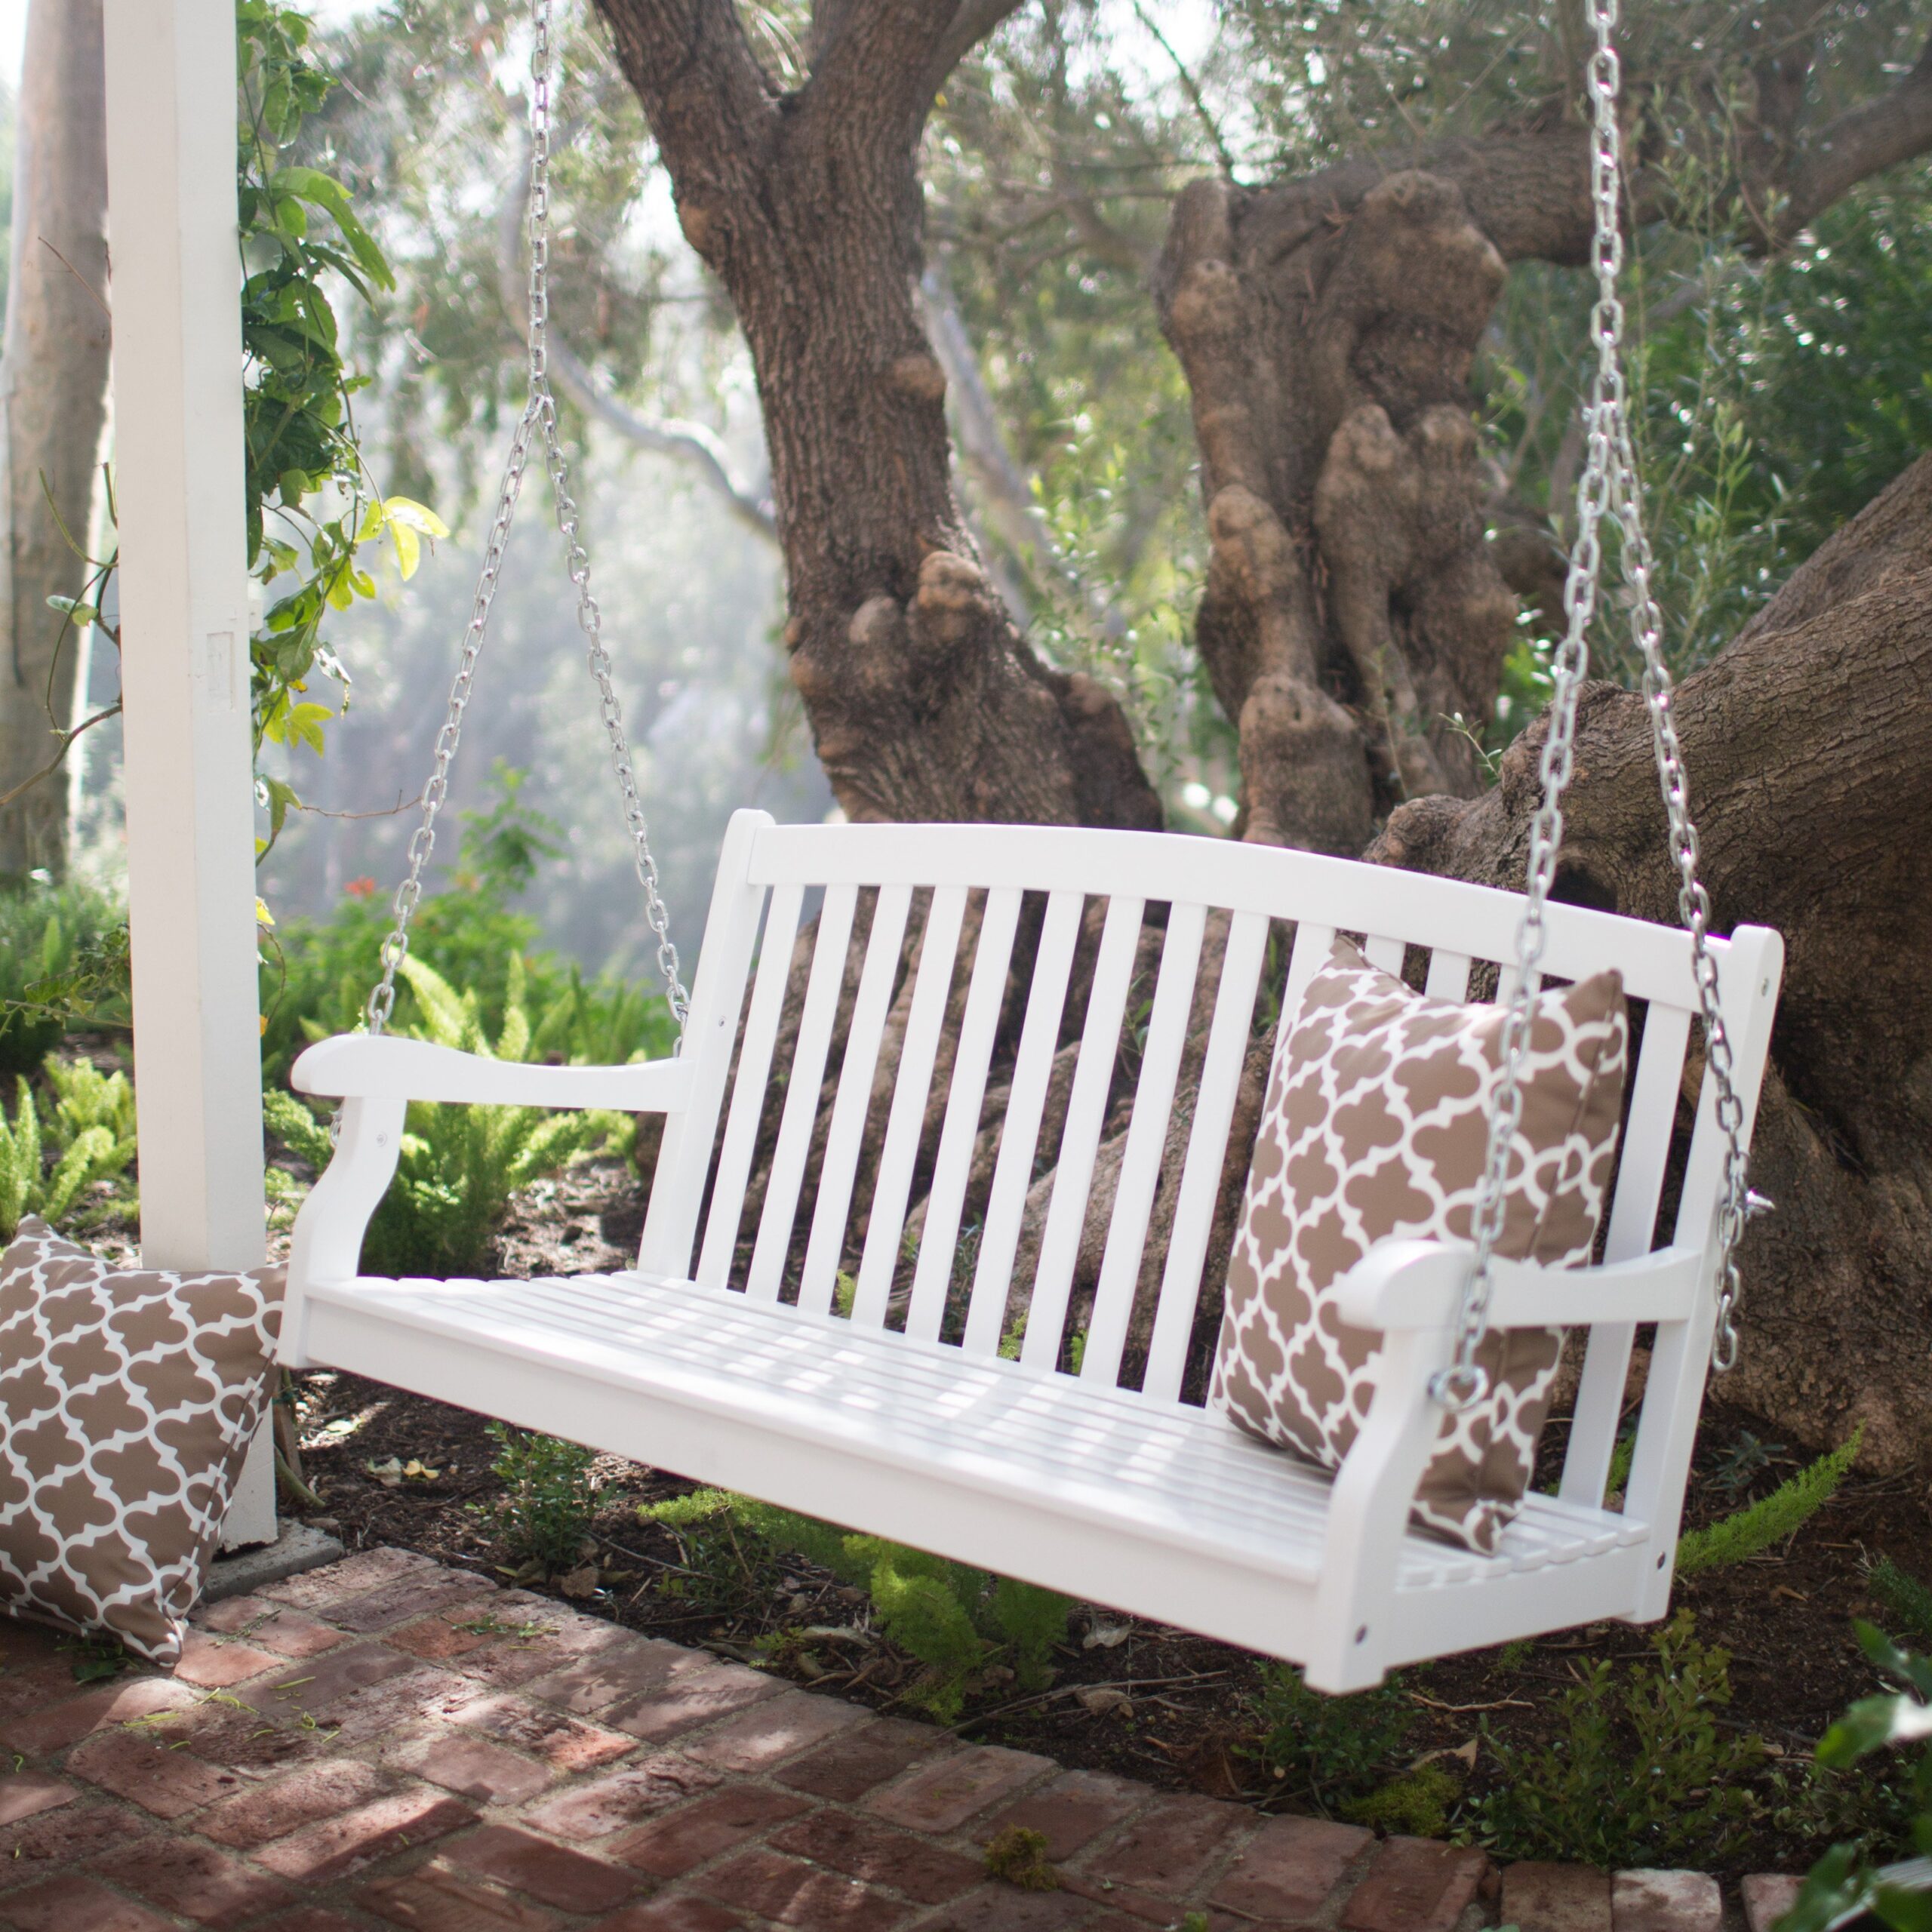 Porch Swings – Add comfort with style